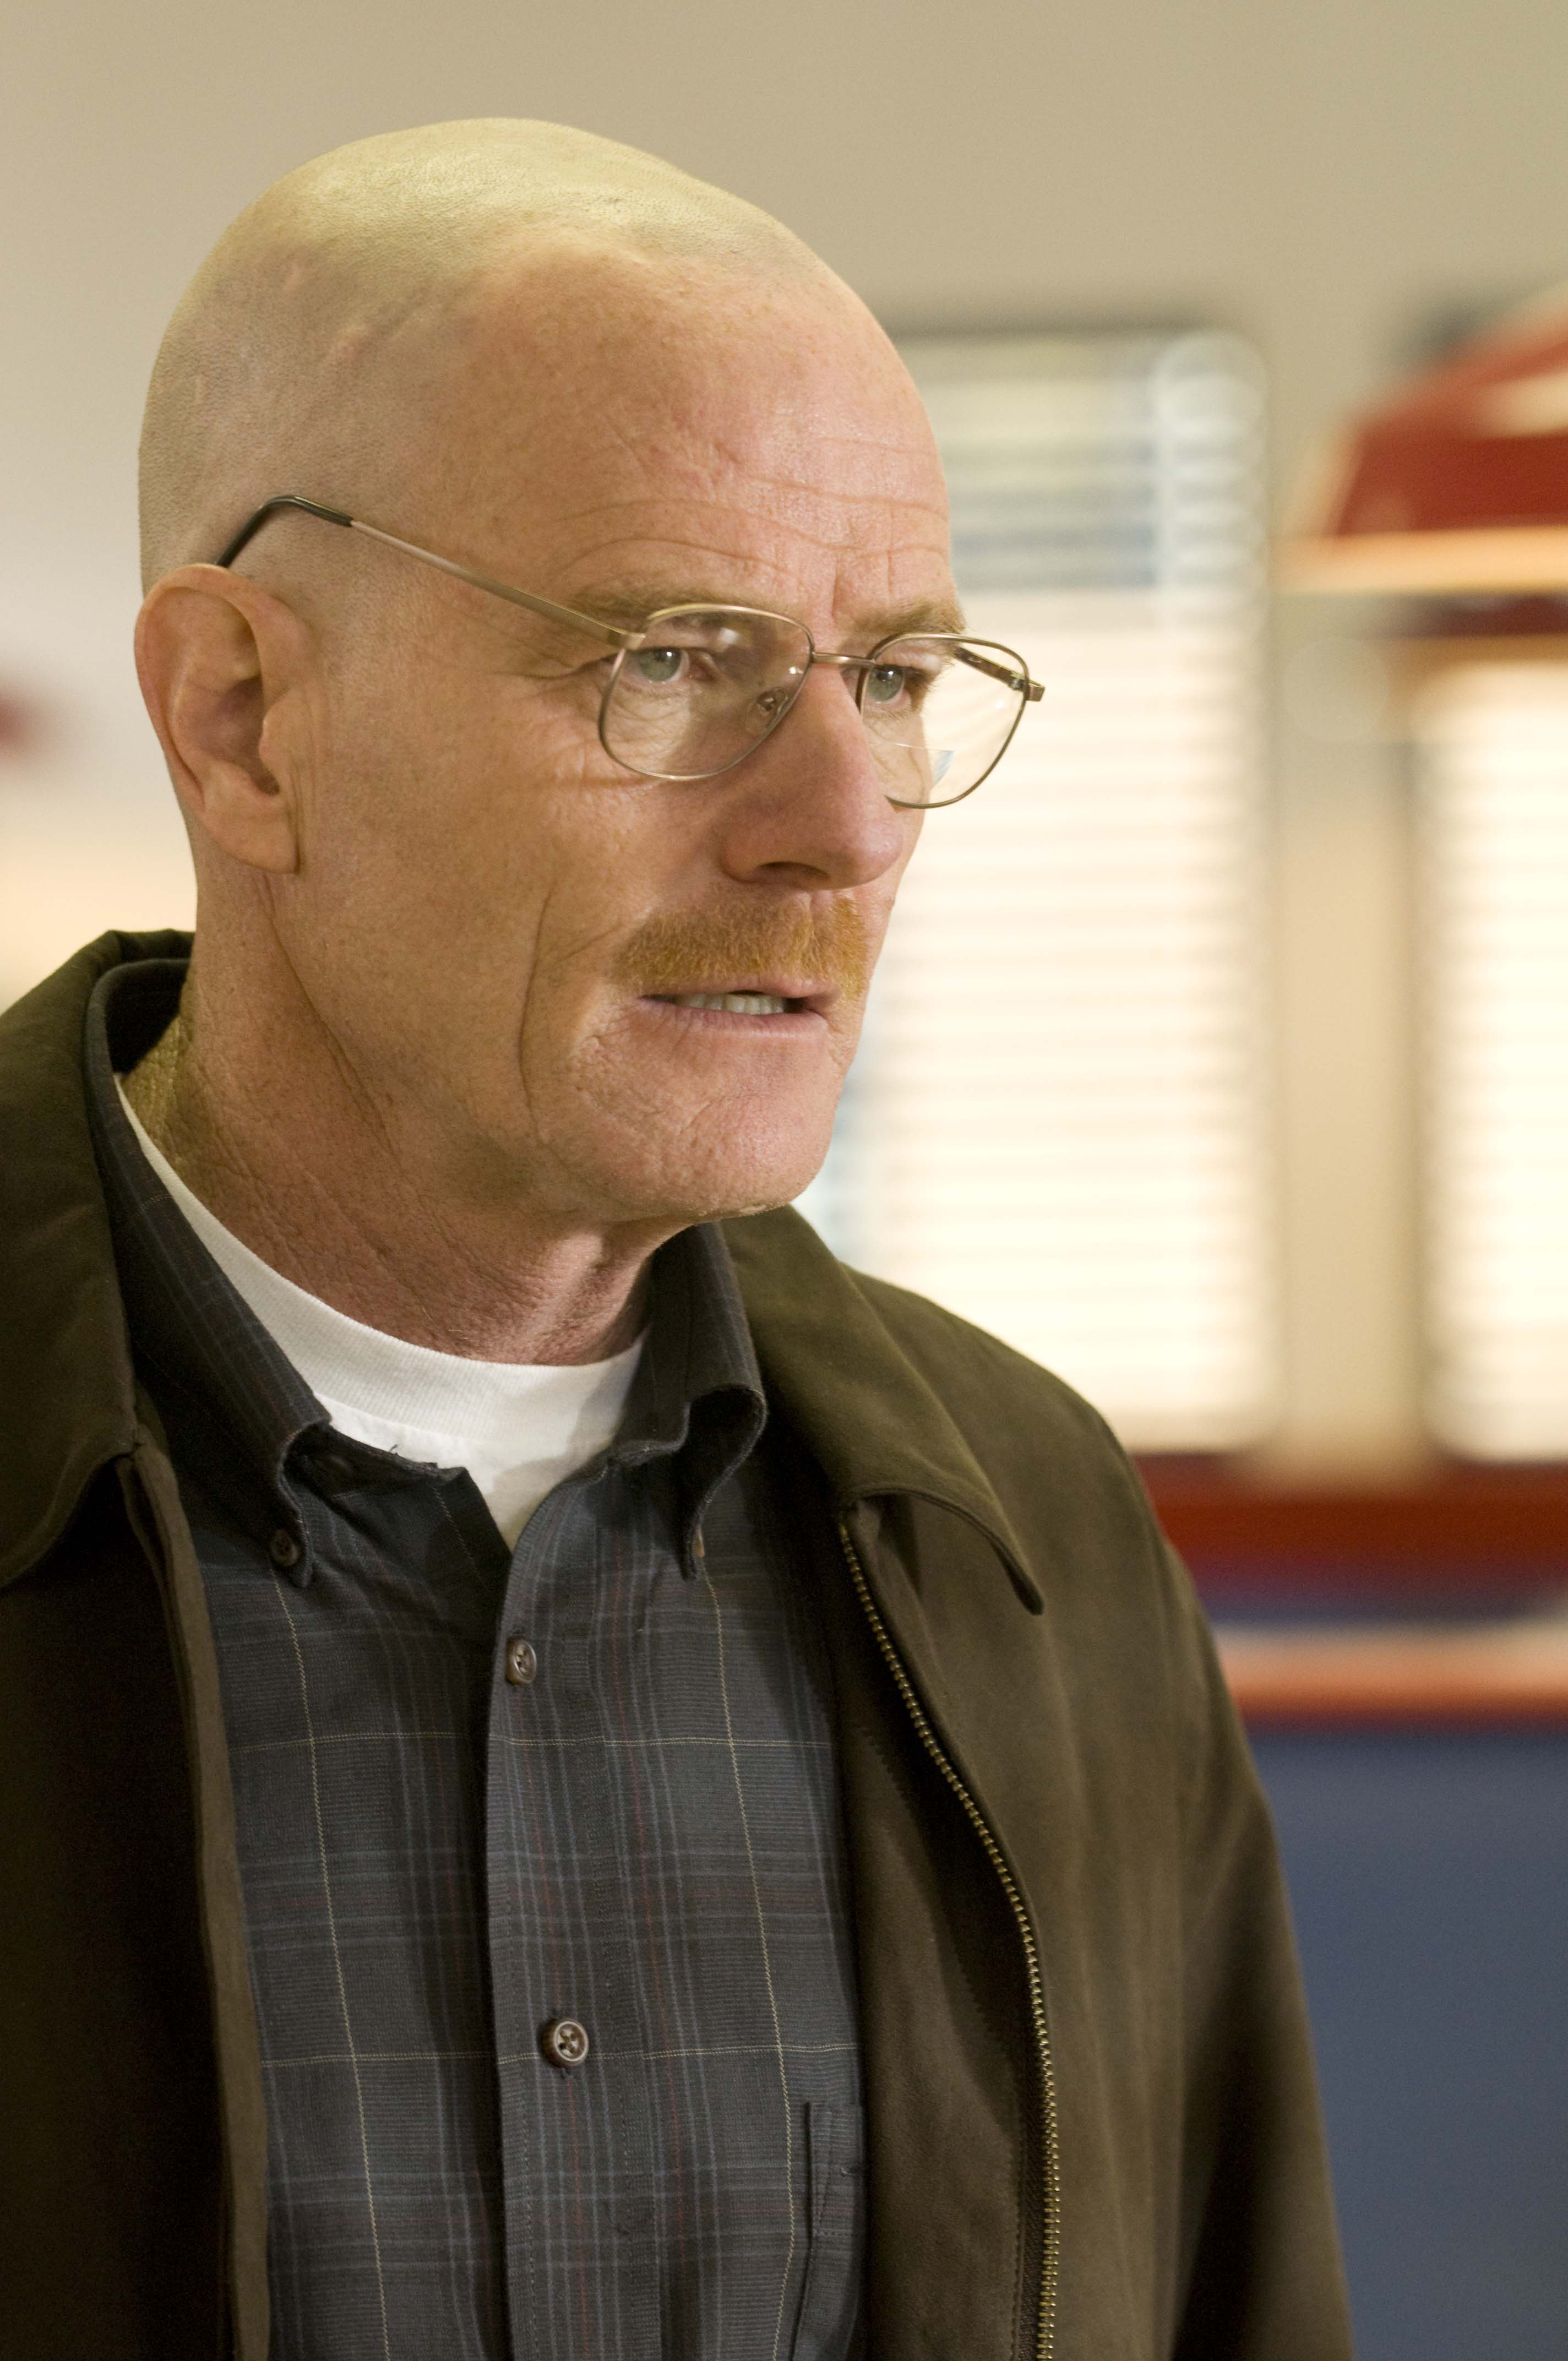 Bryan Cranston Breaking Bad Season 2 Still Episode 11 Malcolm In The Middle Gallery